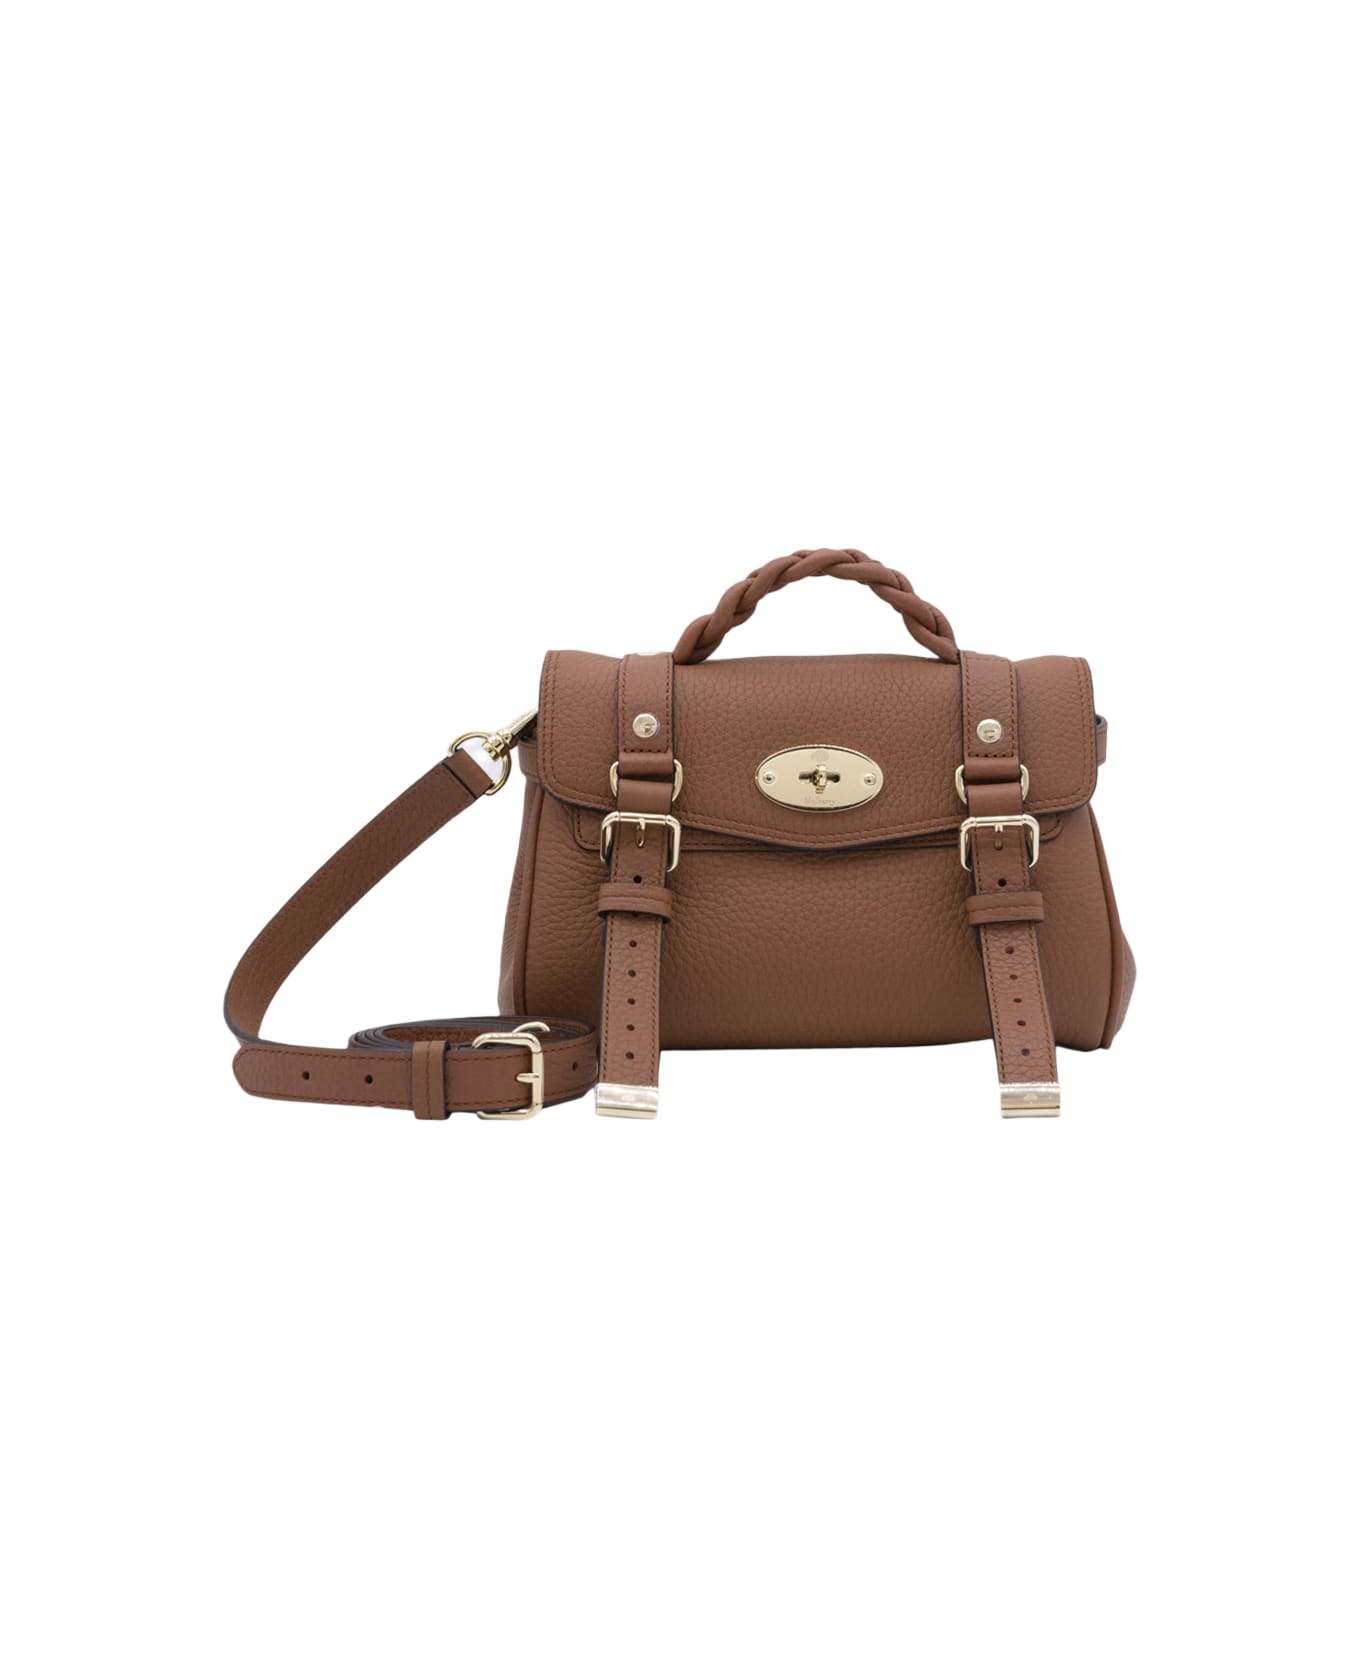 Mulberry Brown Leather Alexa Tote Bag - Chestnut ショルダーバッグ